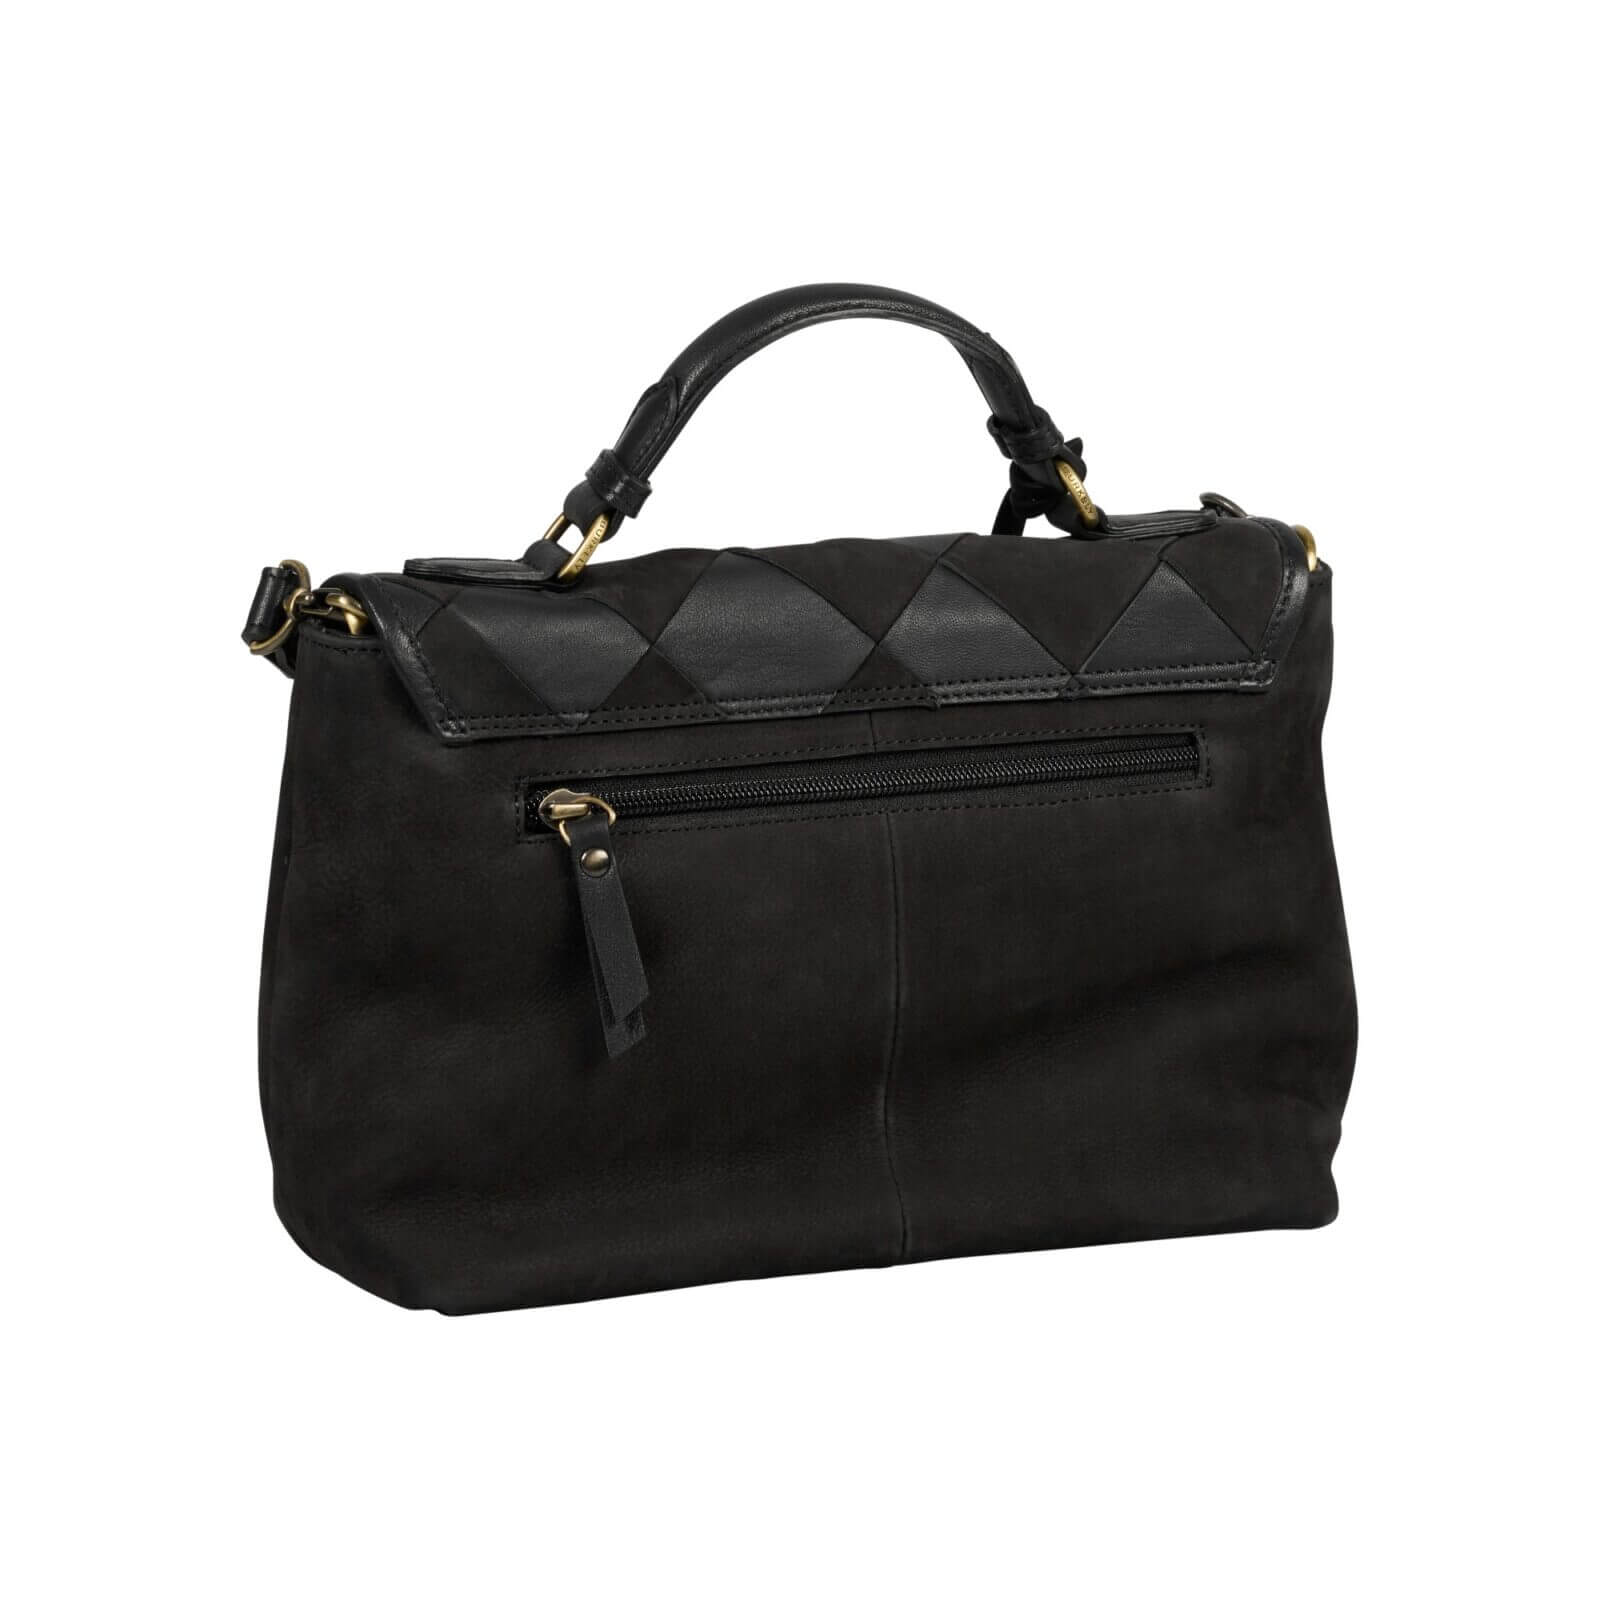 BURKELY EVEN ELIN CITYBAG